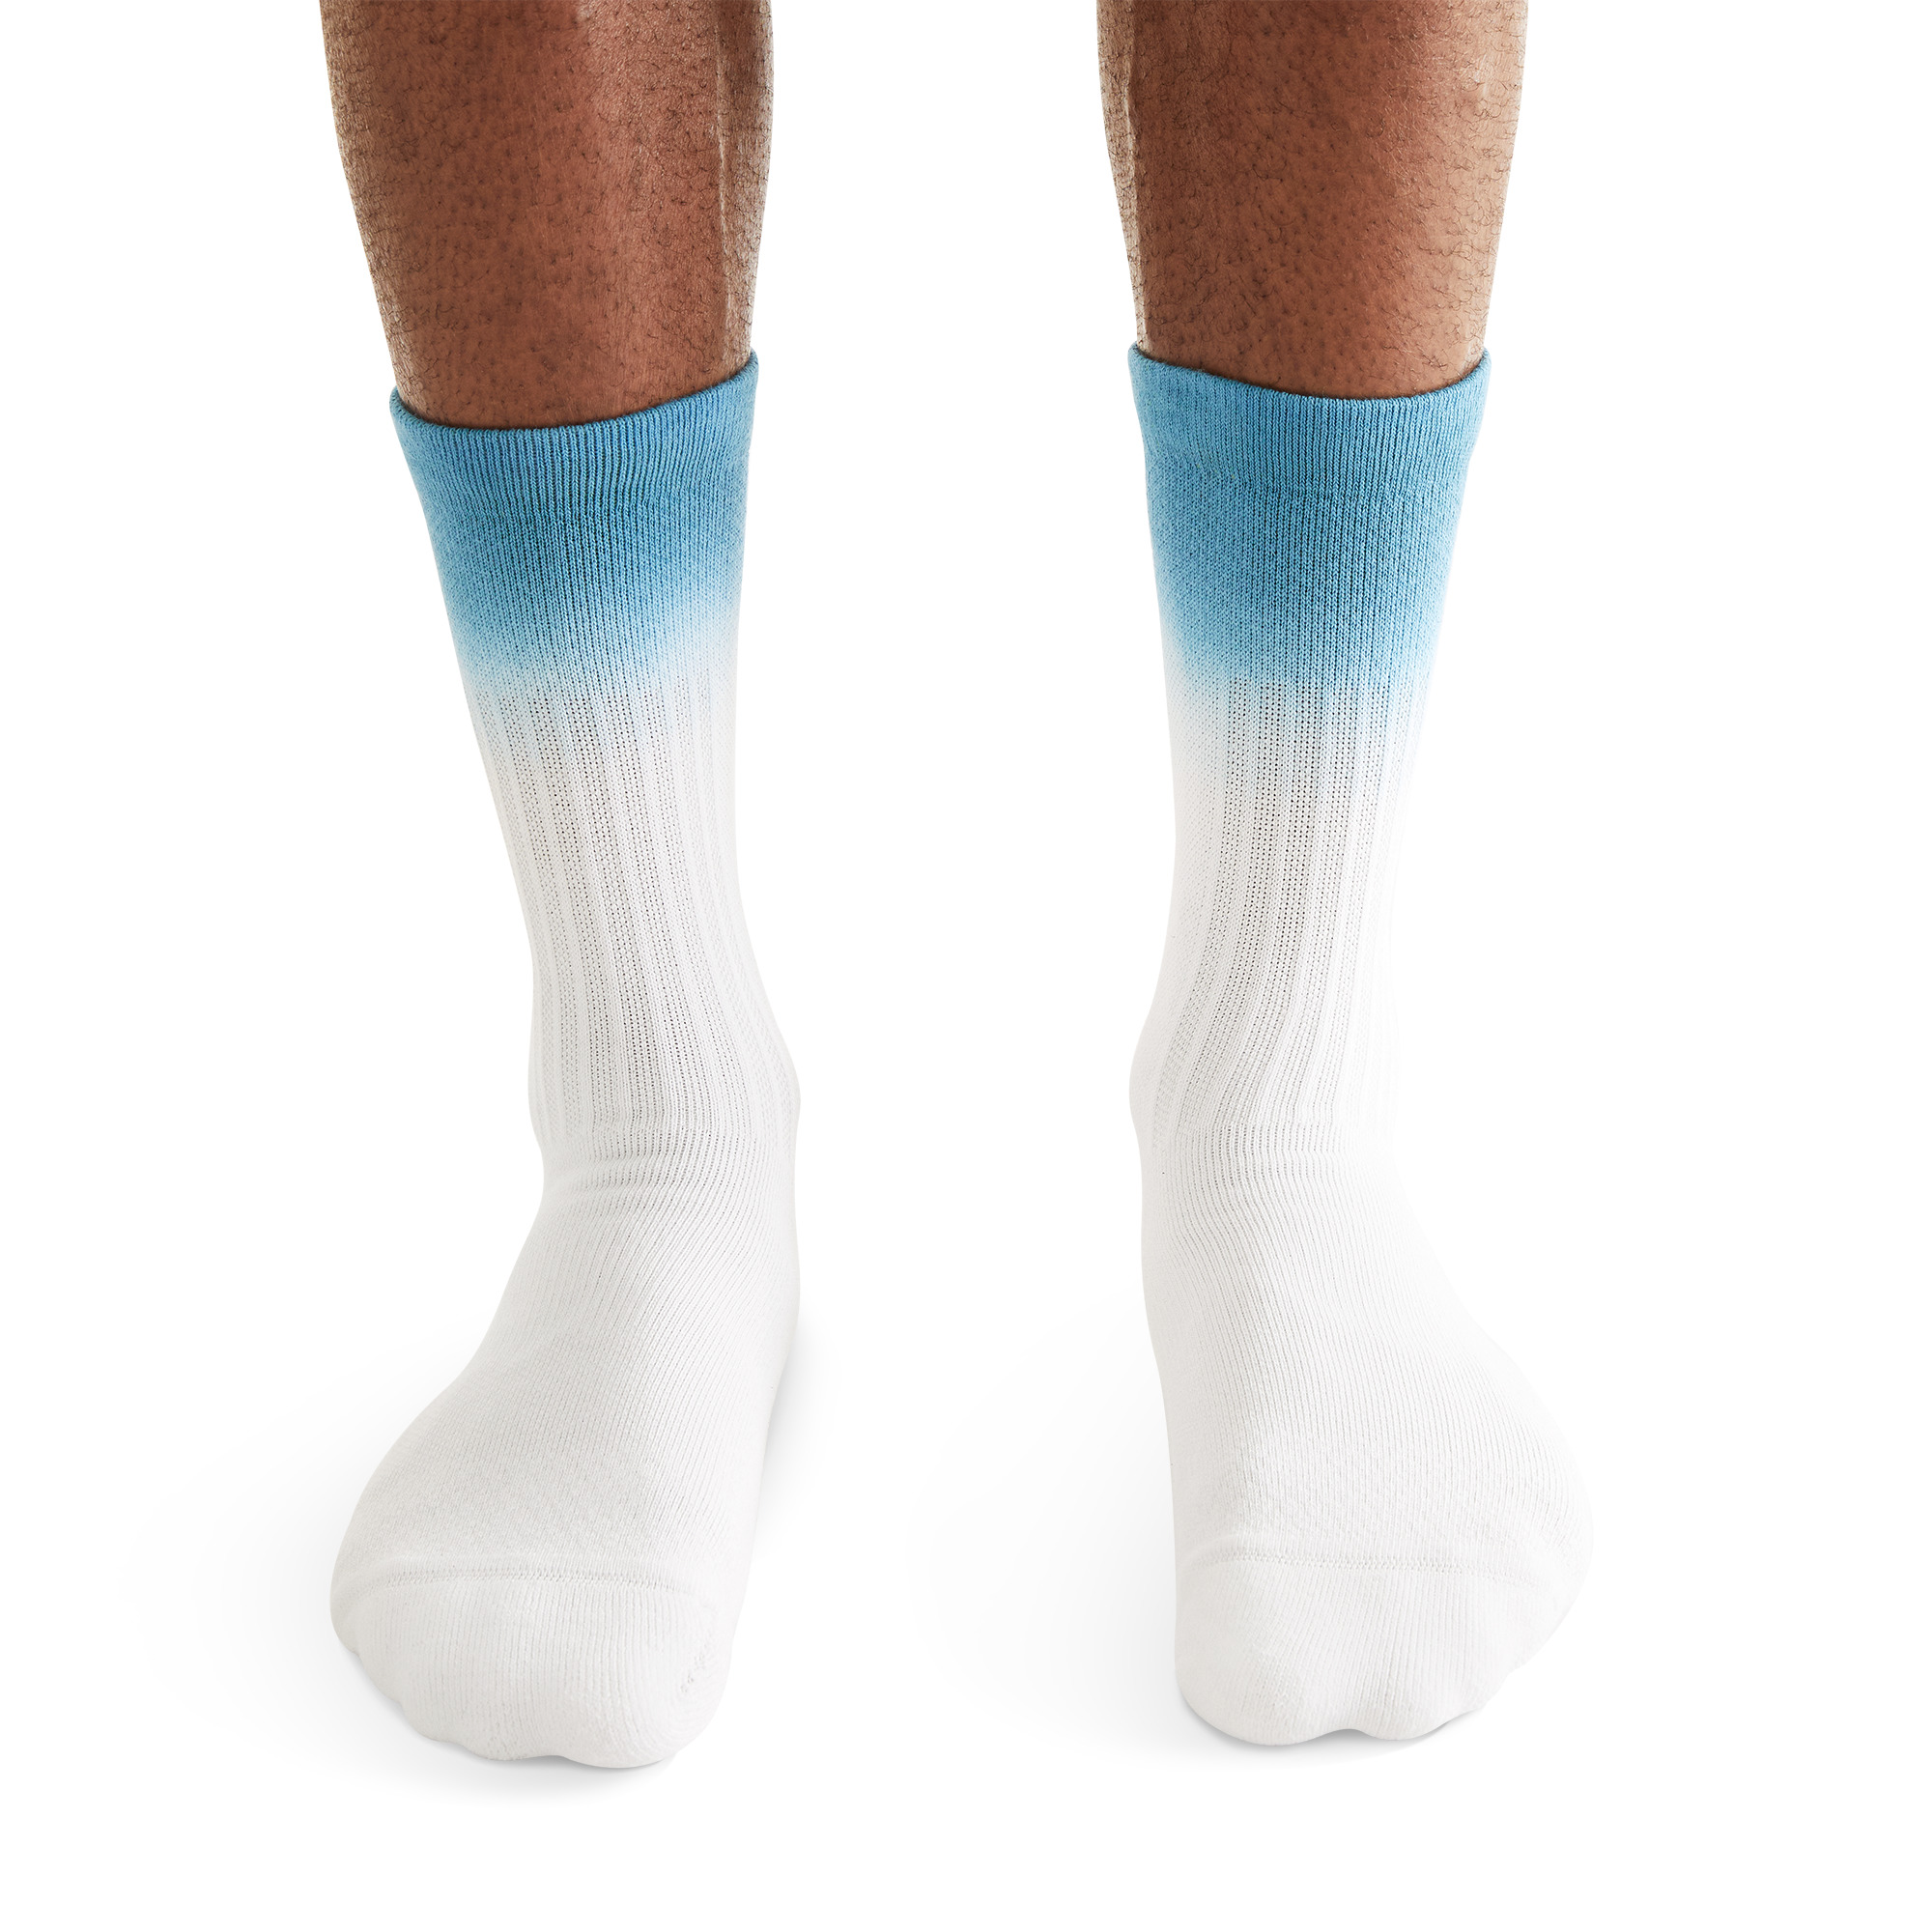 All-Day Sock - 2